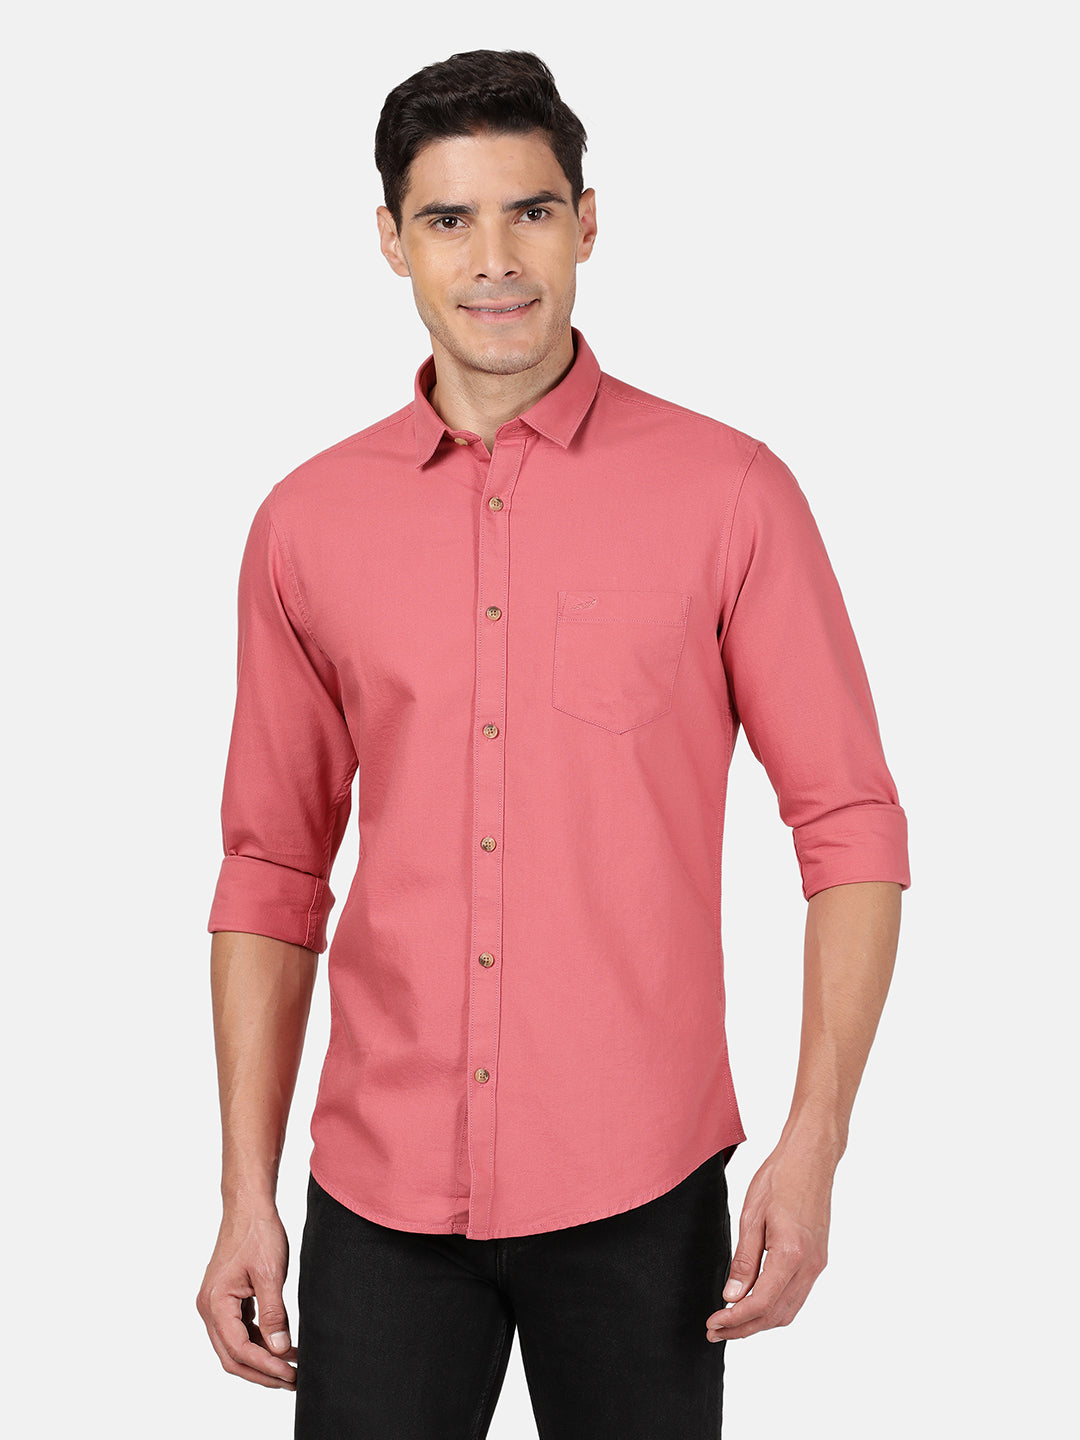 Crocodile Casual Full Sleeve Slim Fit Solid Coral with Collar Shirt for Men